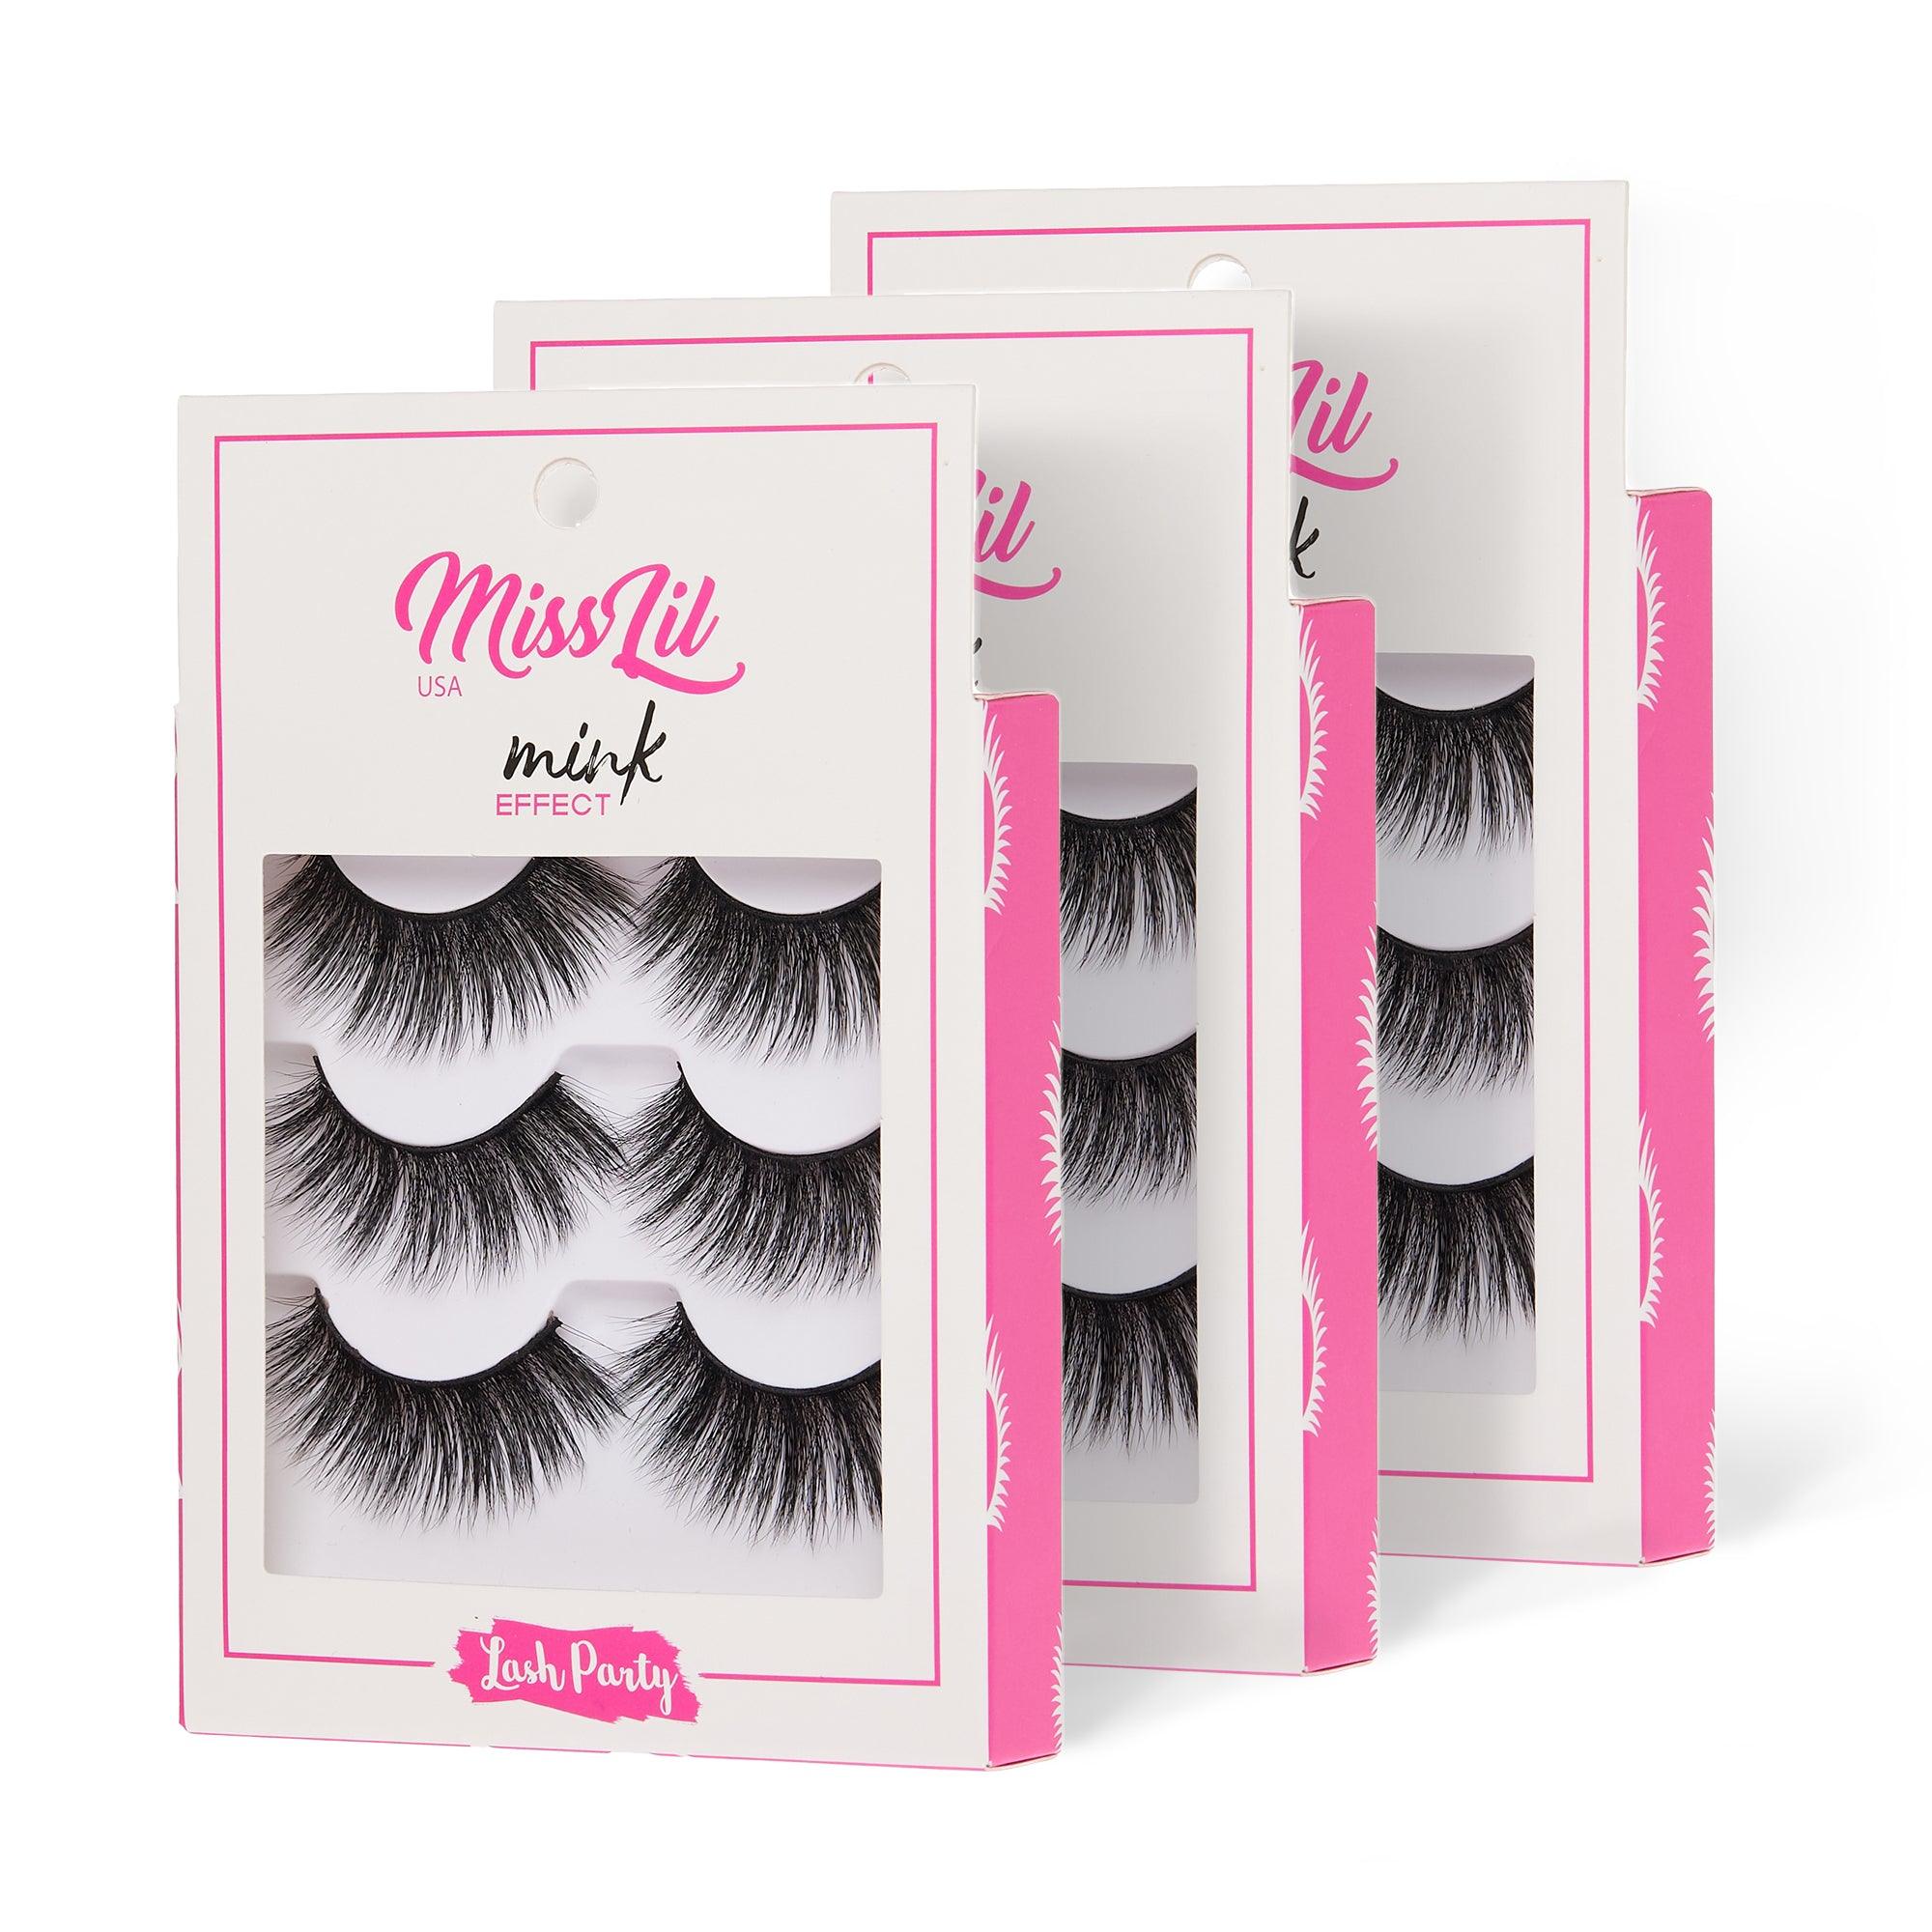 3-Pair Faux Mink Effect Eyelashes - Lash Party Collection #1 ( Pack of 12) - Miss Lil USA Wholesale